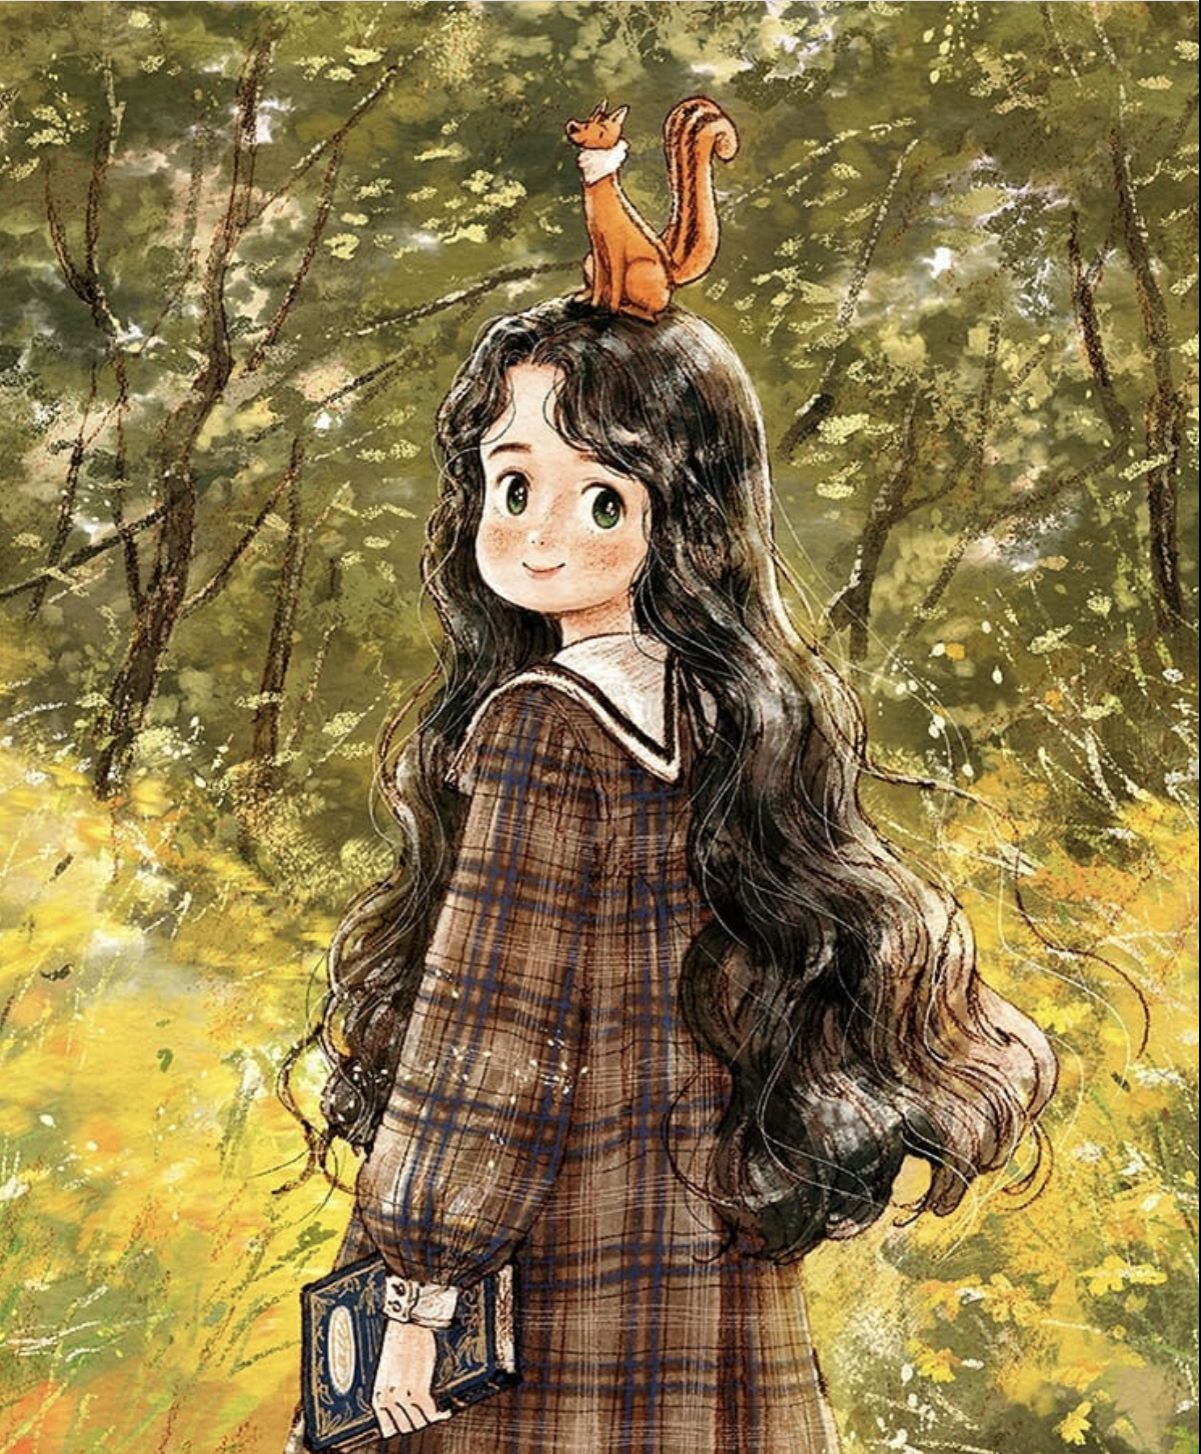 Coloring book sparkling forest girl aeppol